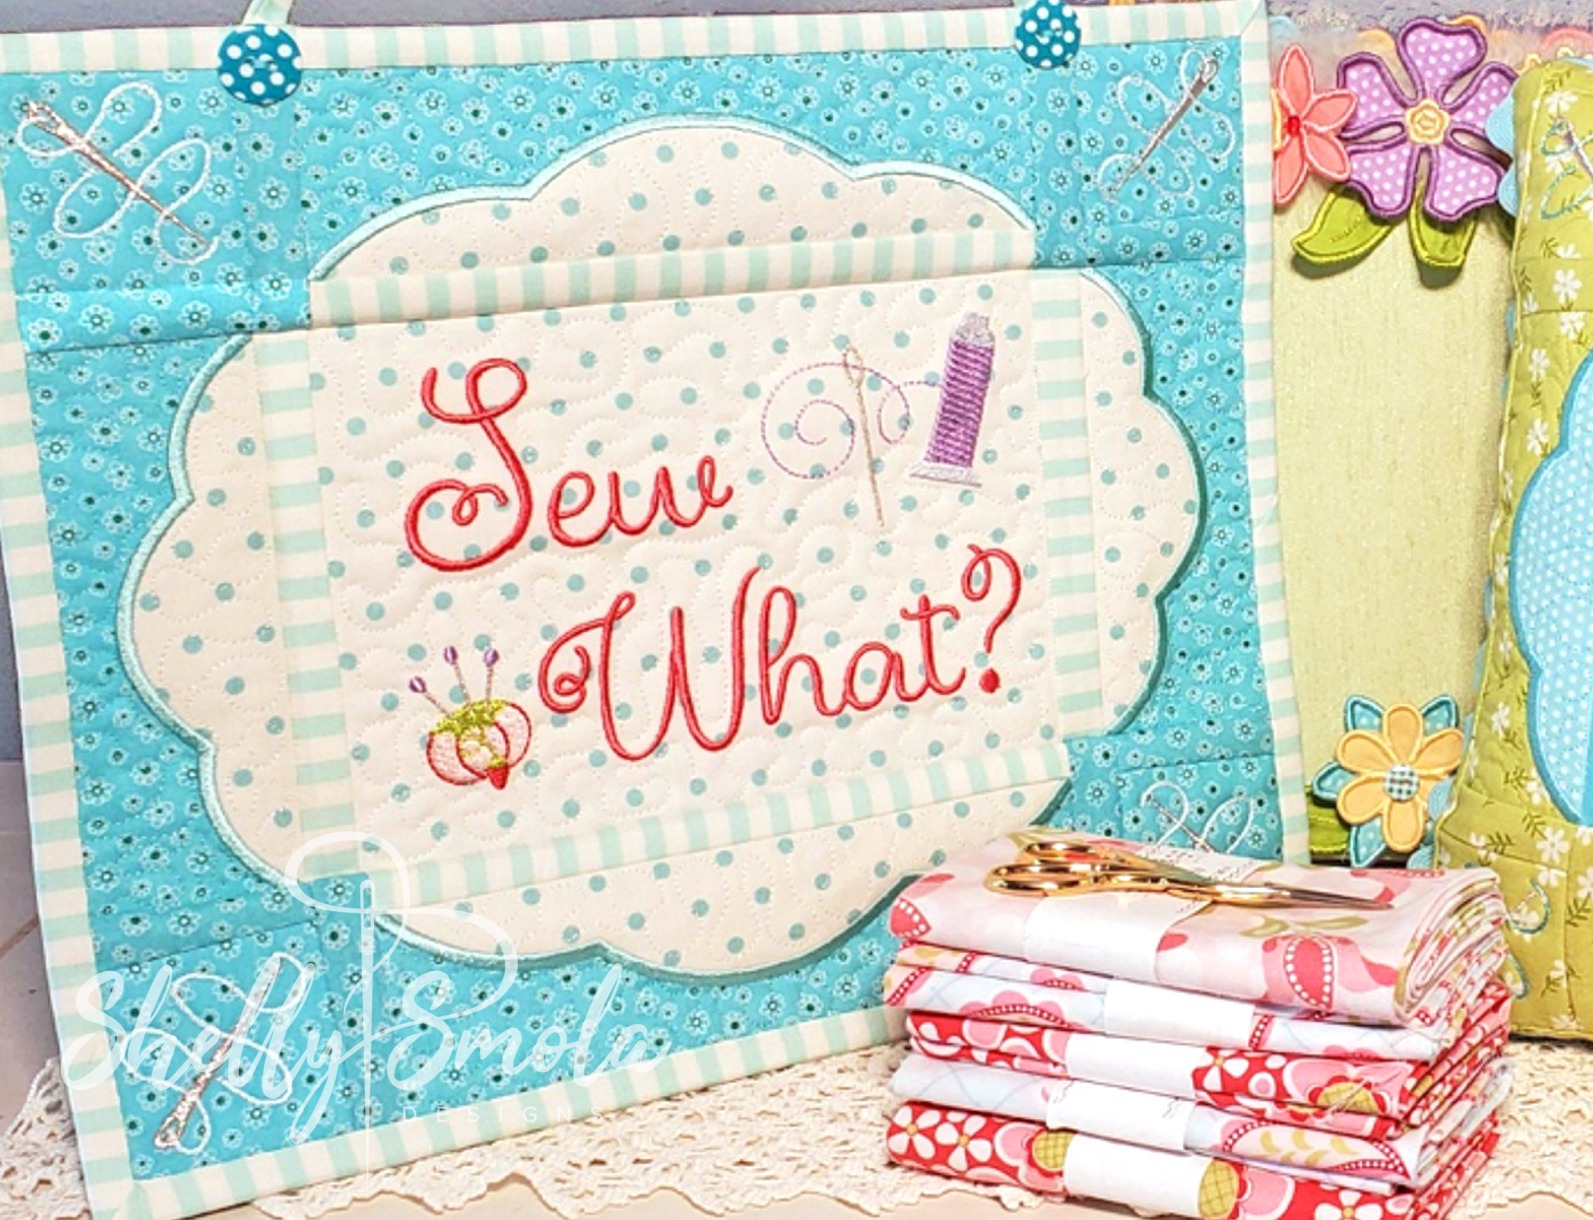 Sew Crazy - Sew What by Shelly Smola